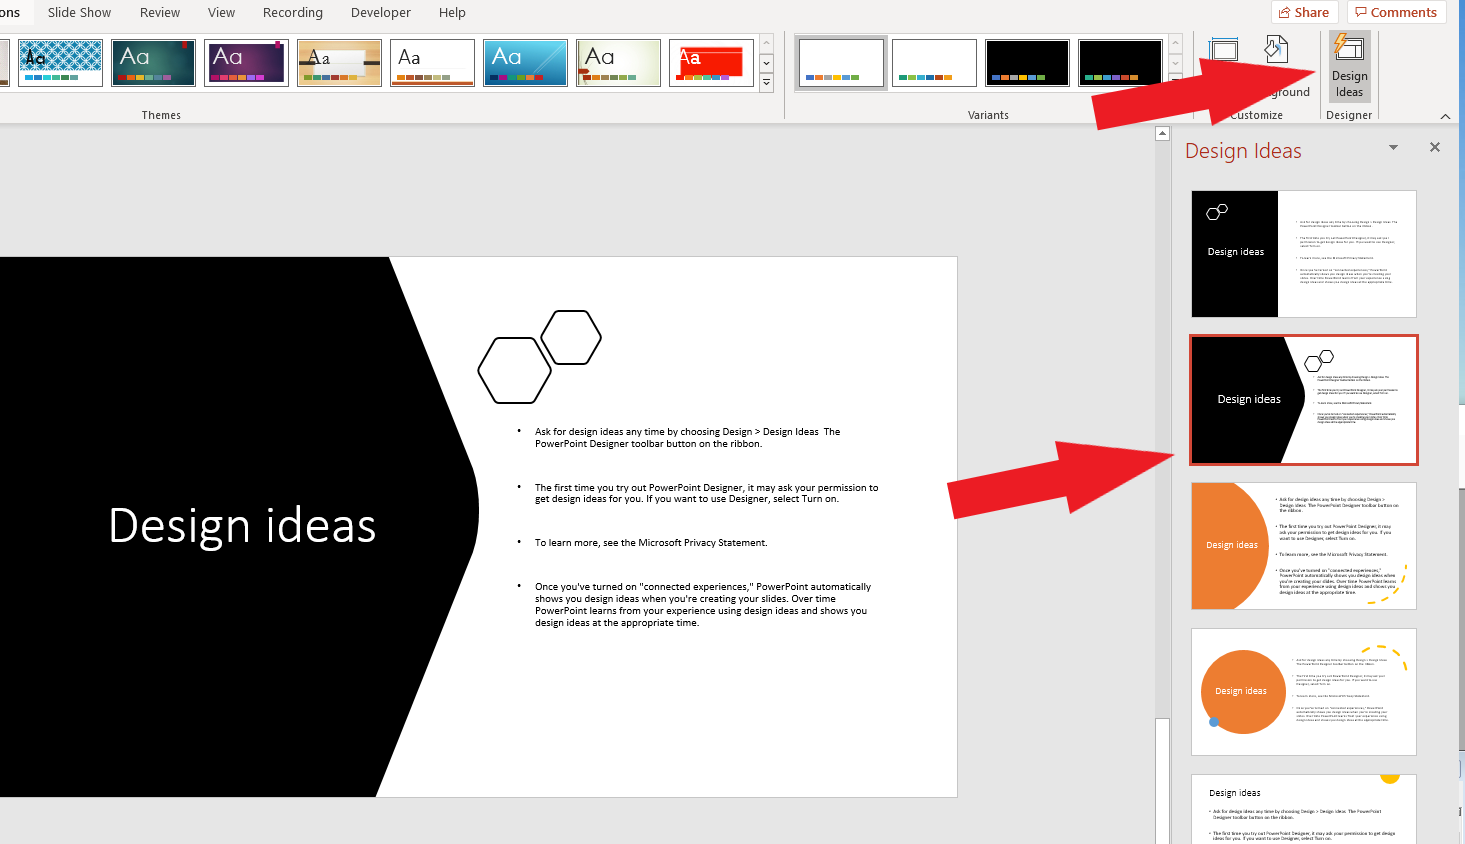 PowerPoint Designer applying design ideas to one slide at a time